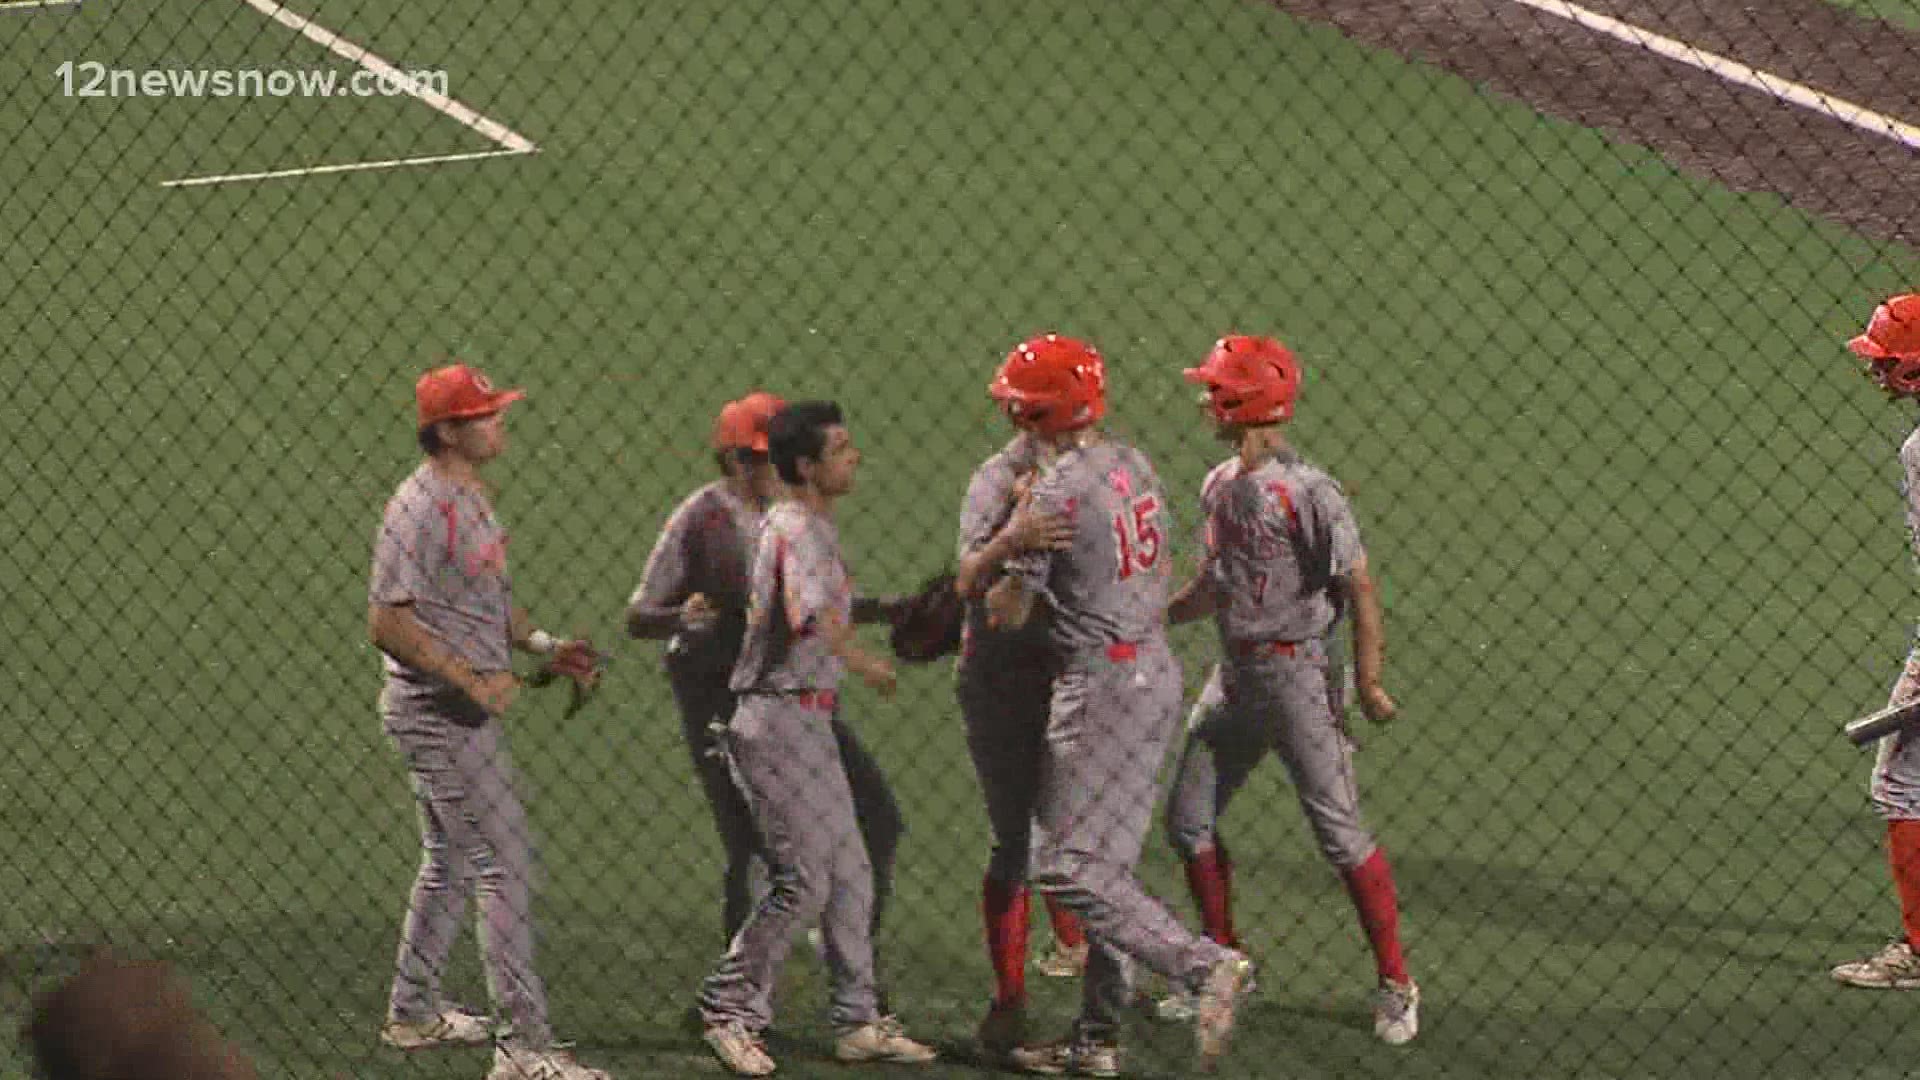 Orangefield advances to Regional Semifinals where they'll face Rusk